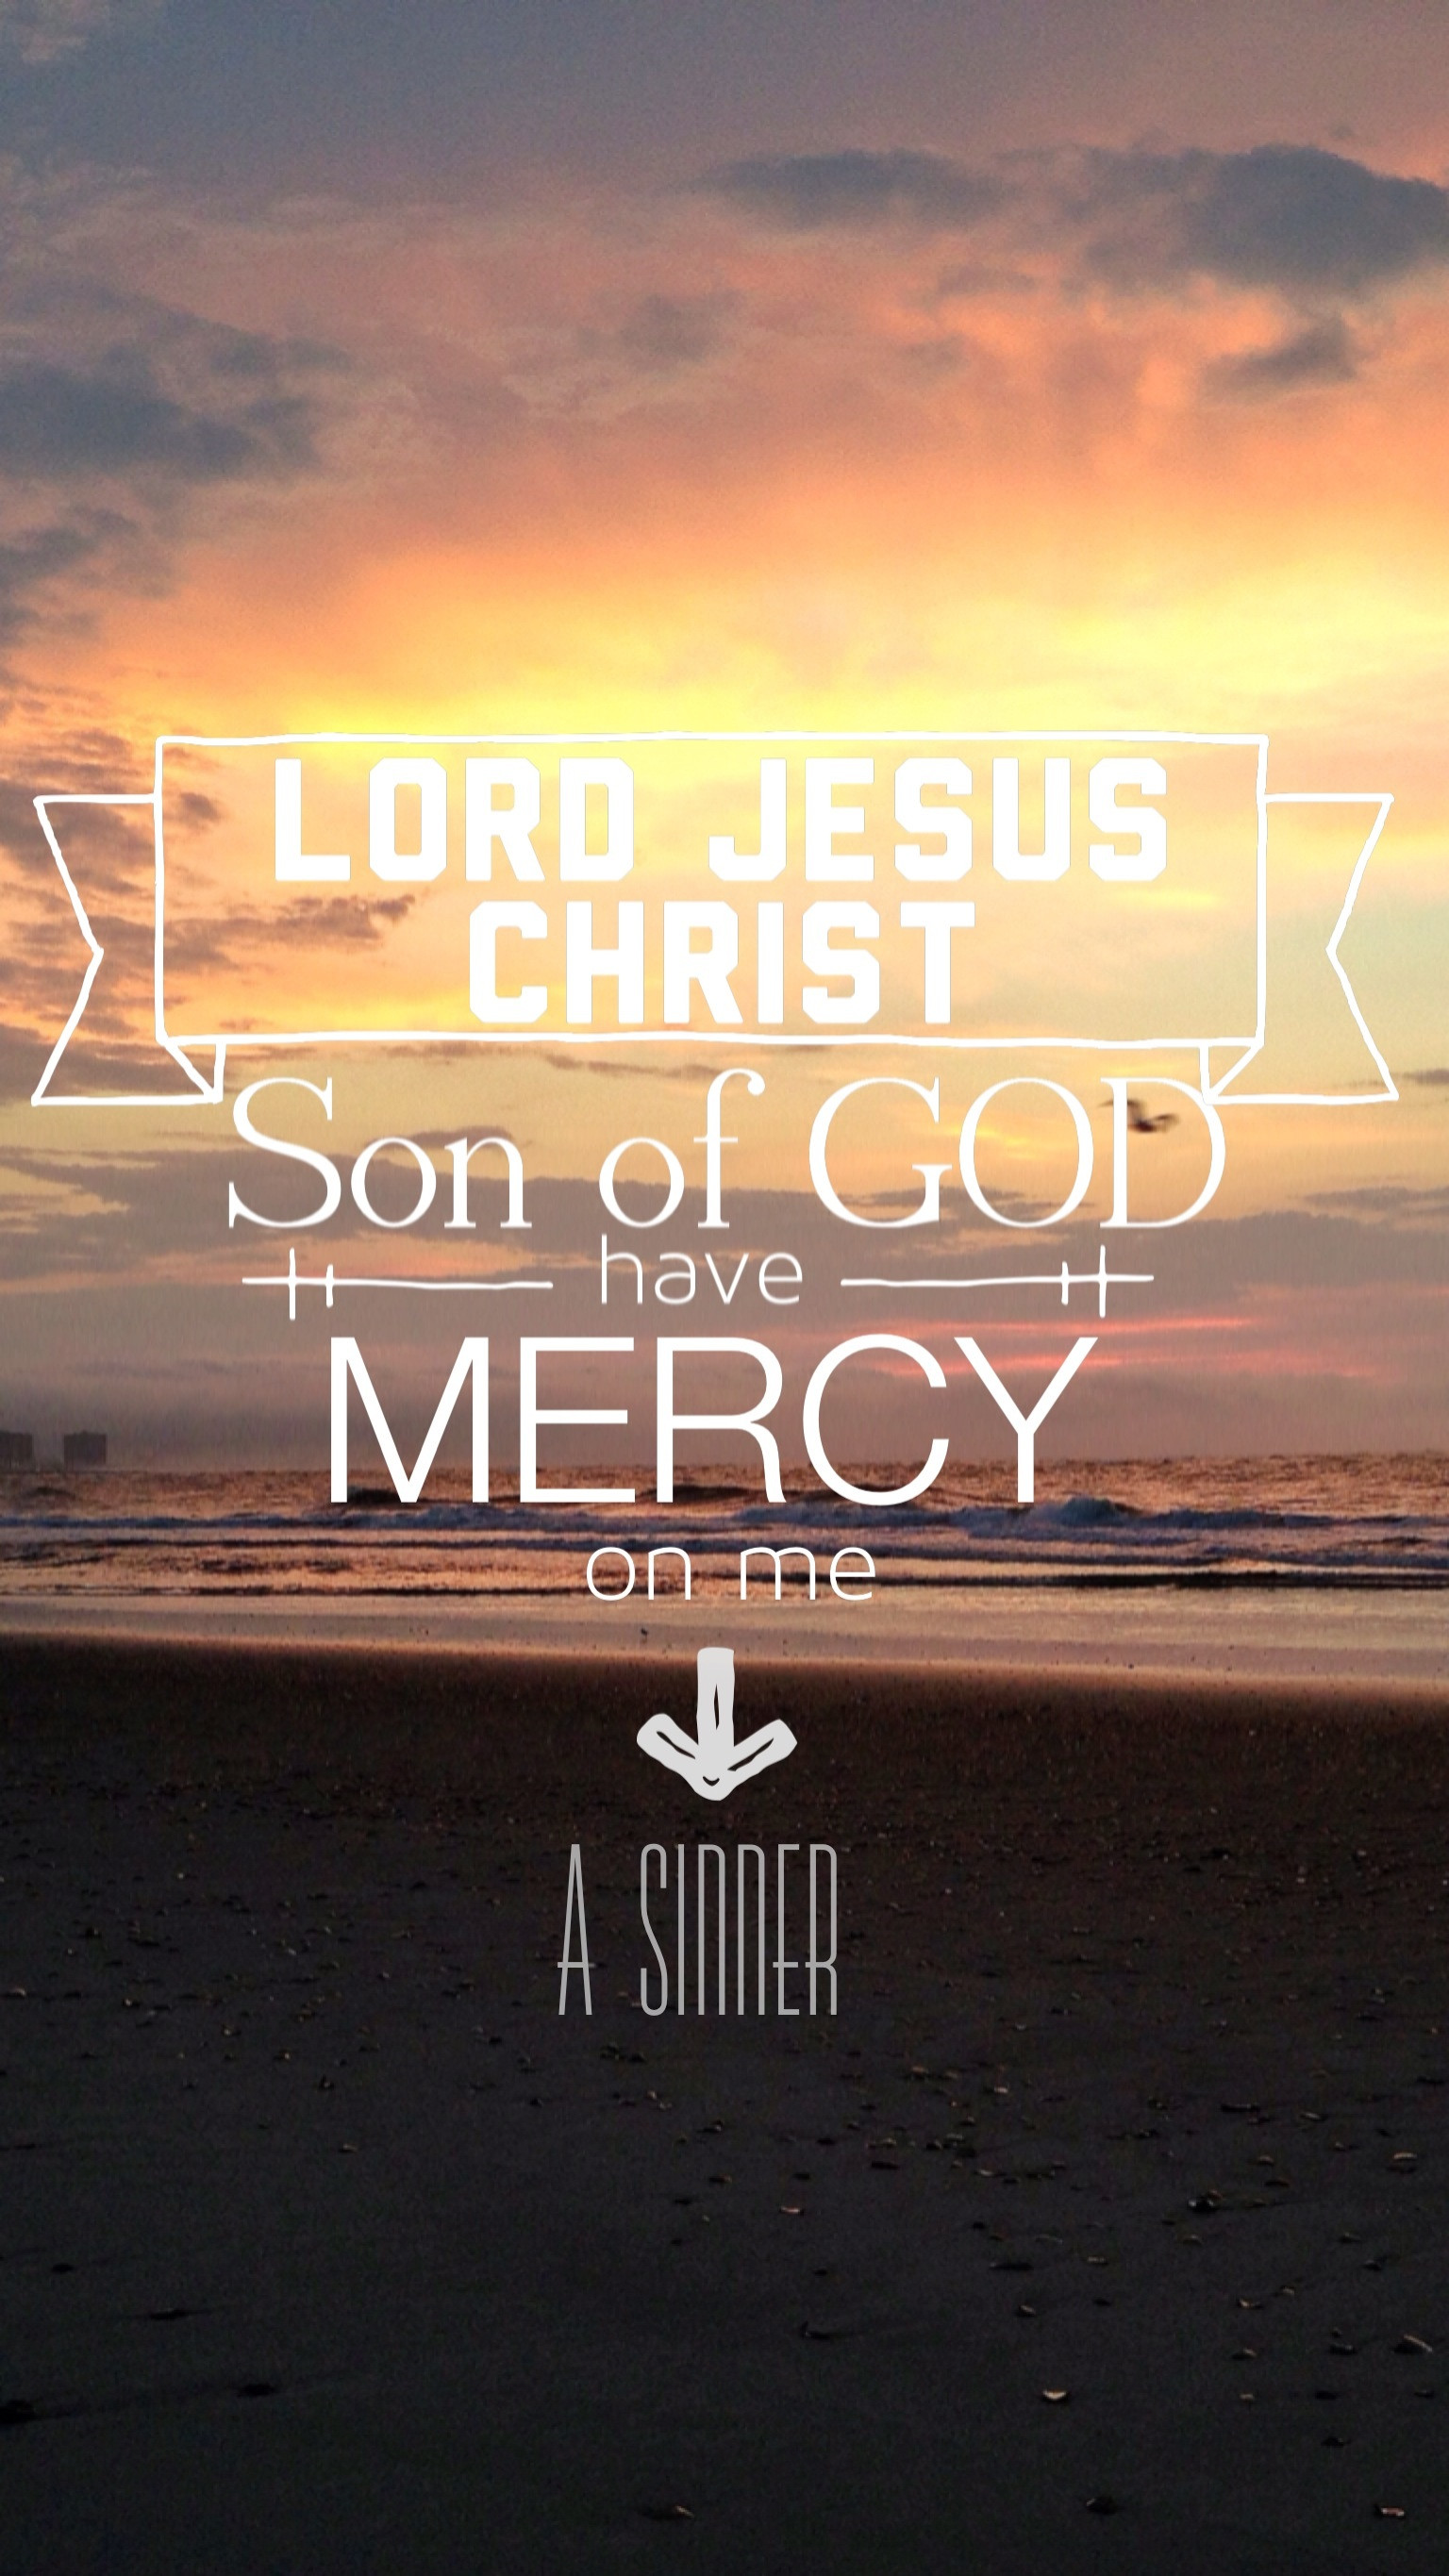 Jesus Prayer wallpaper for iPhone 5 (trying my hand at some design stuff): TrueChristian